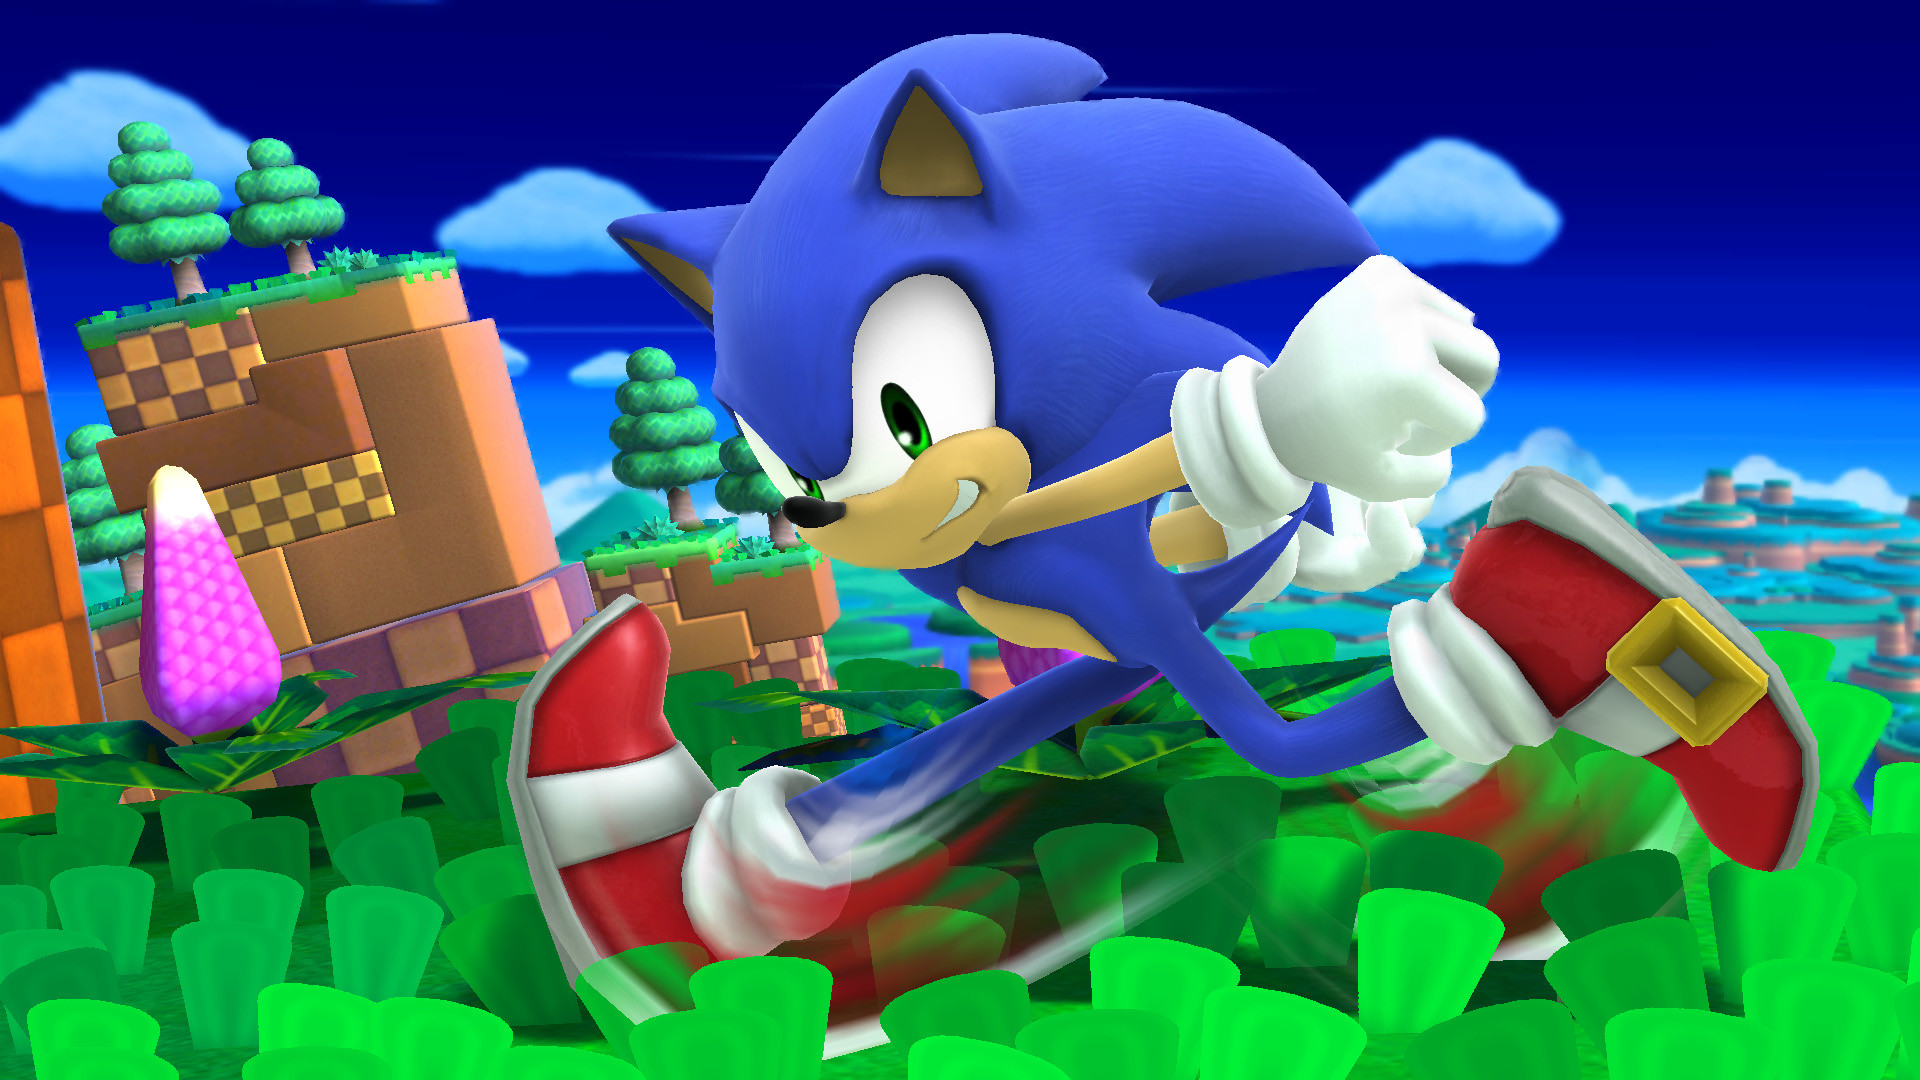 1920x1080 Mario & Sonic at the Sochi 2014 Olympic Winter Games